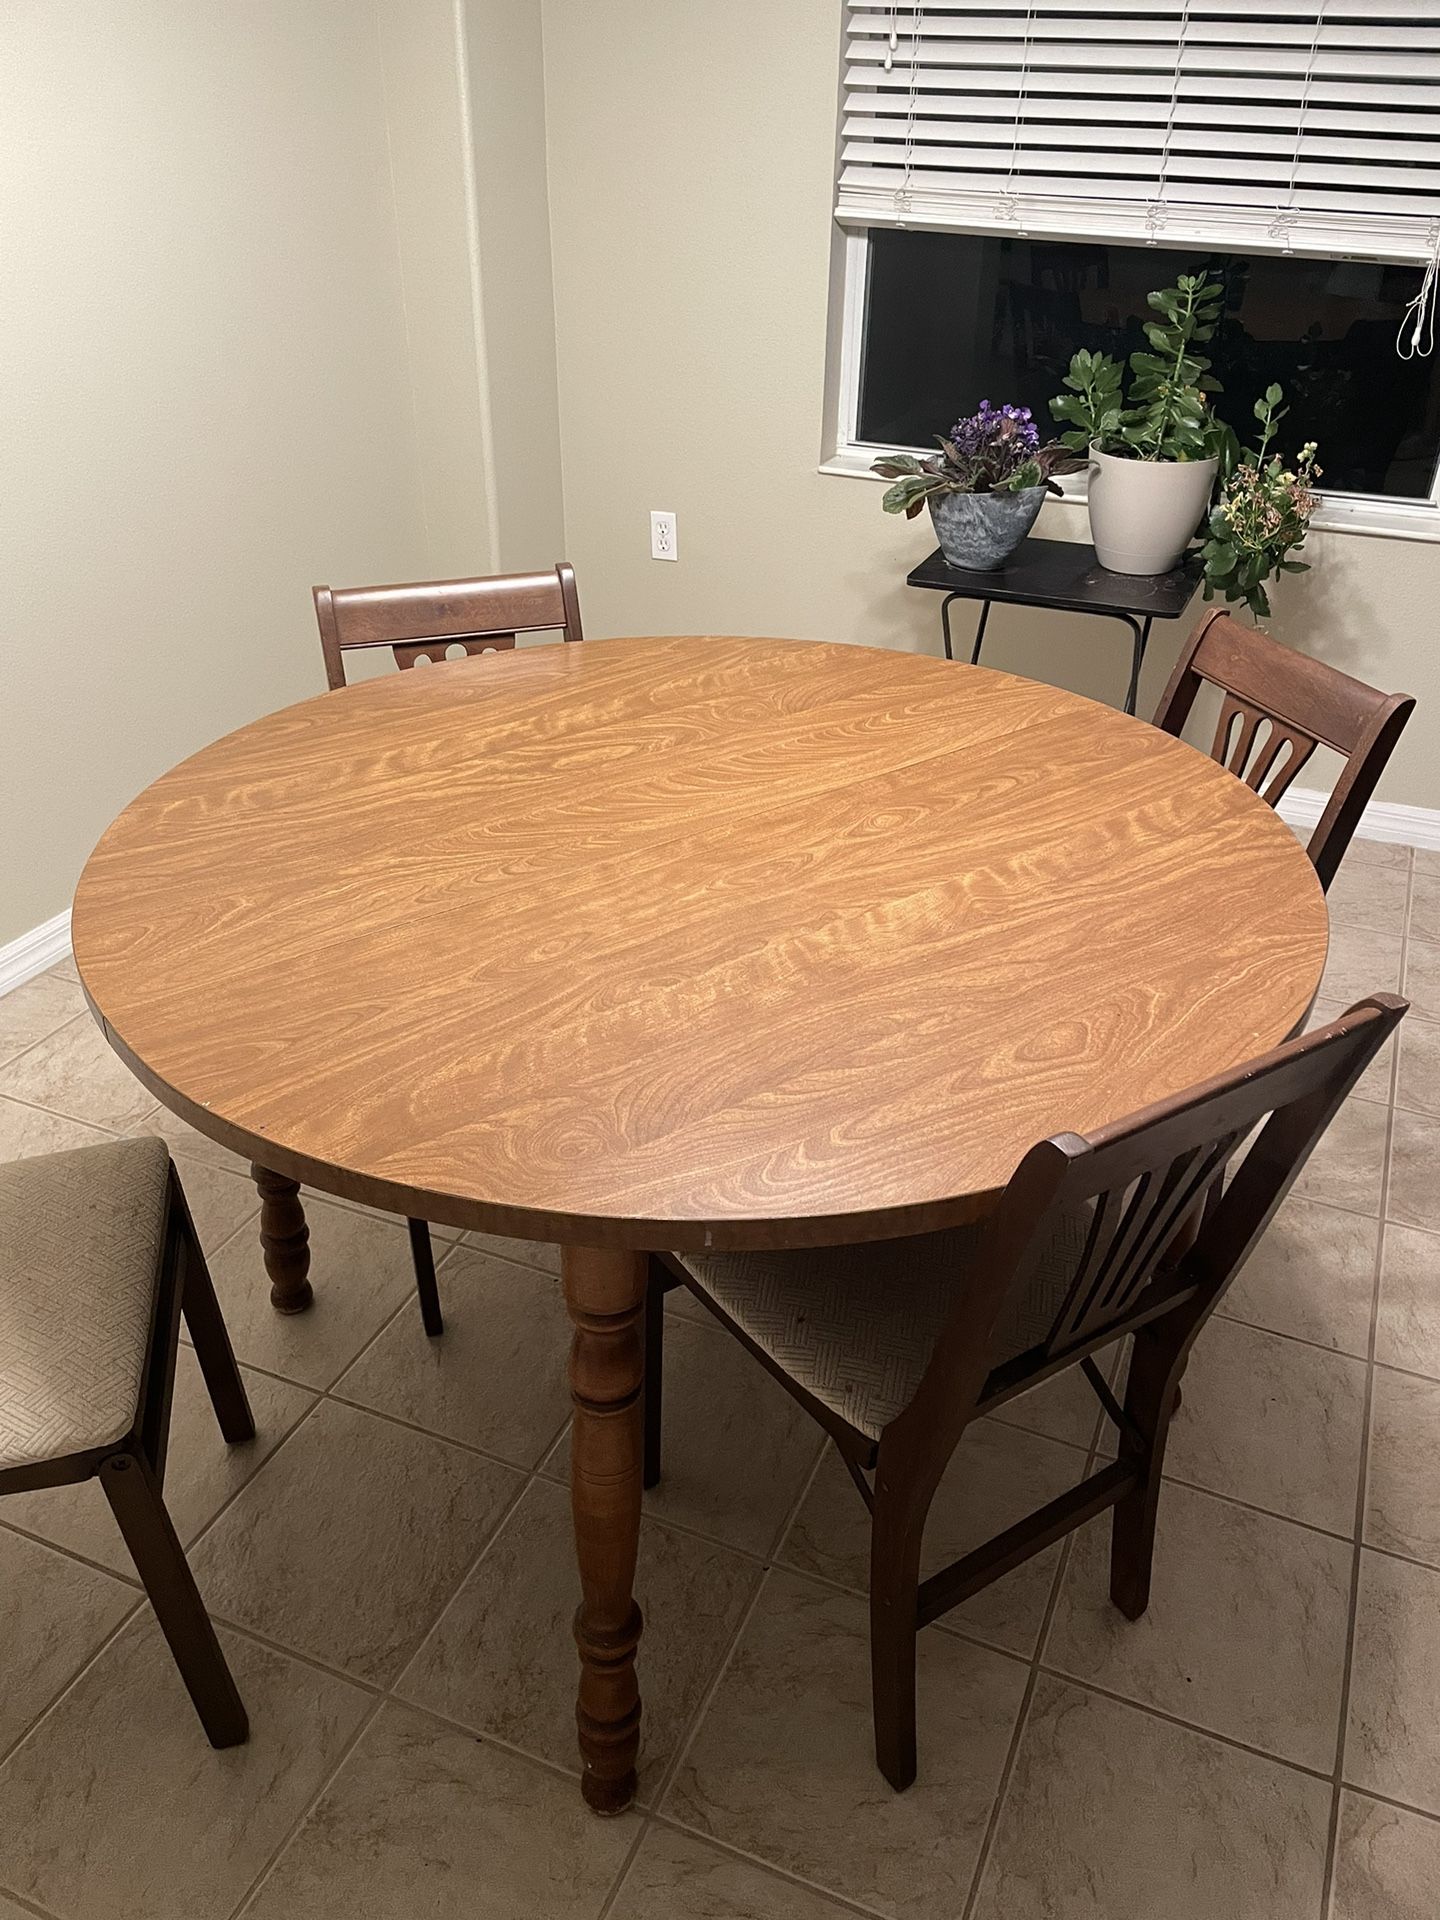 Round Wooden Kitchen Table With Chairs